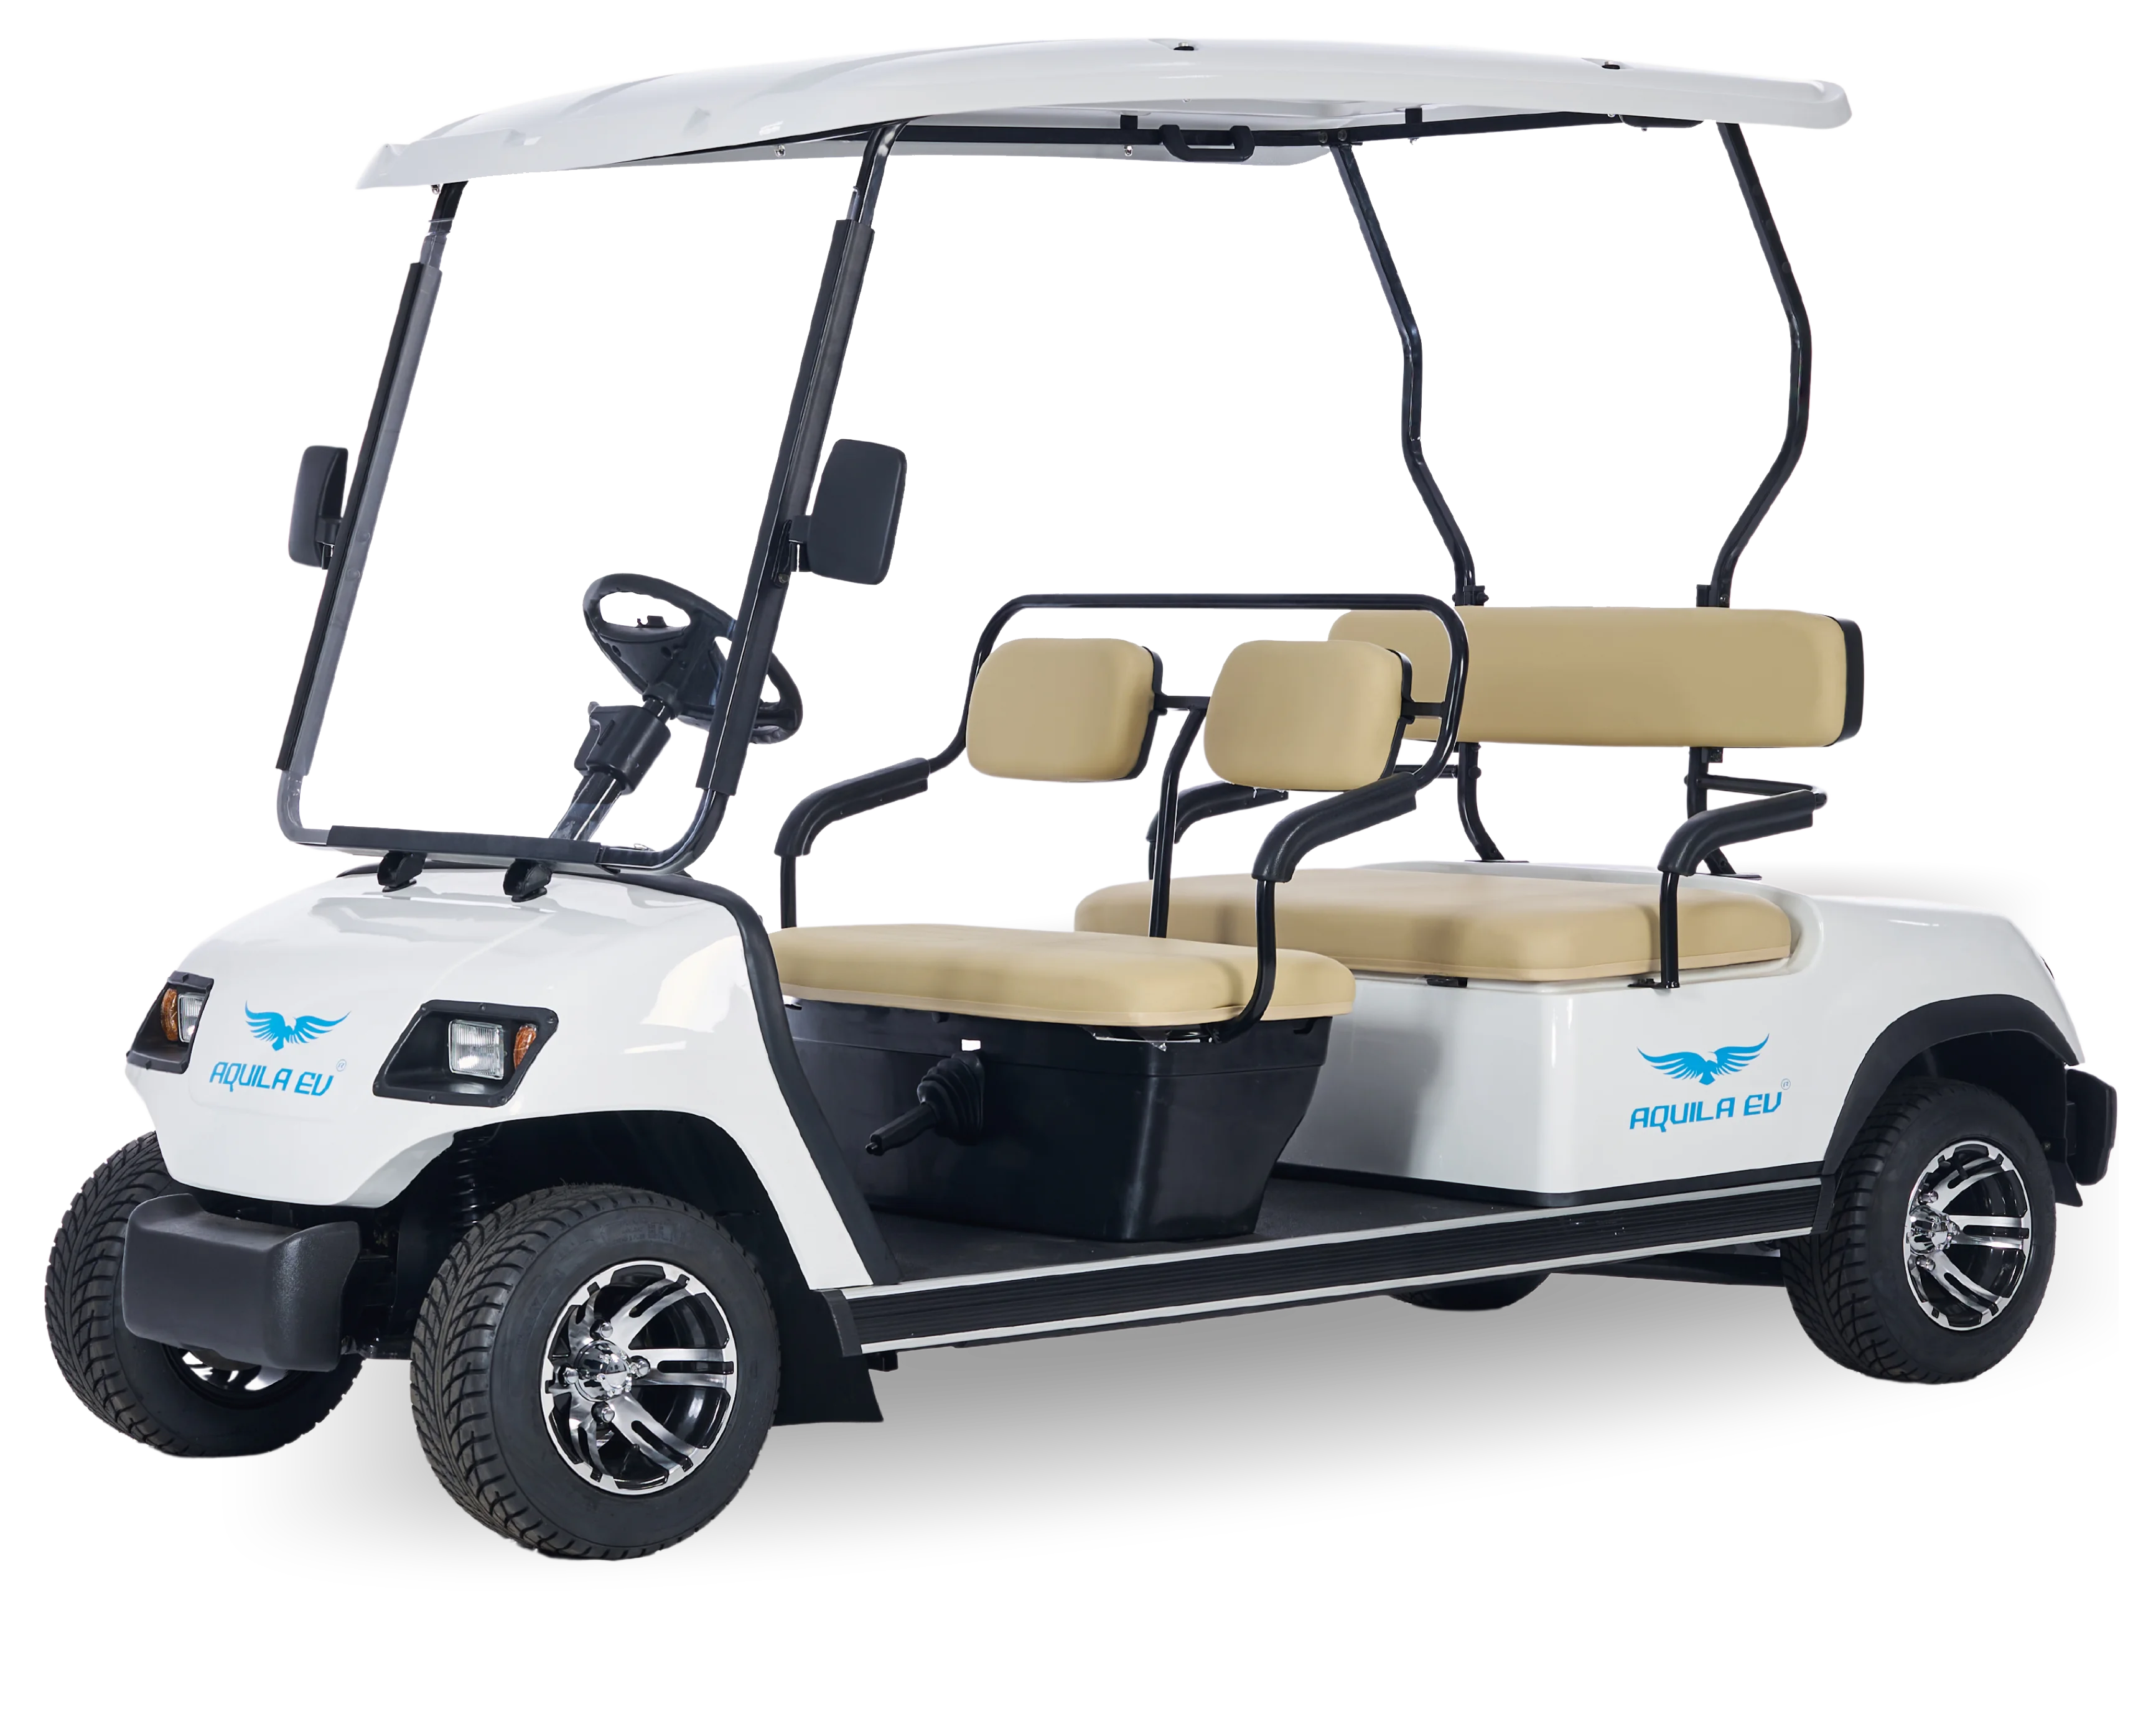 A modern electric golf cart with four seats and a canopy, featuring blue bird logos and equipped with headlights.